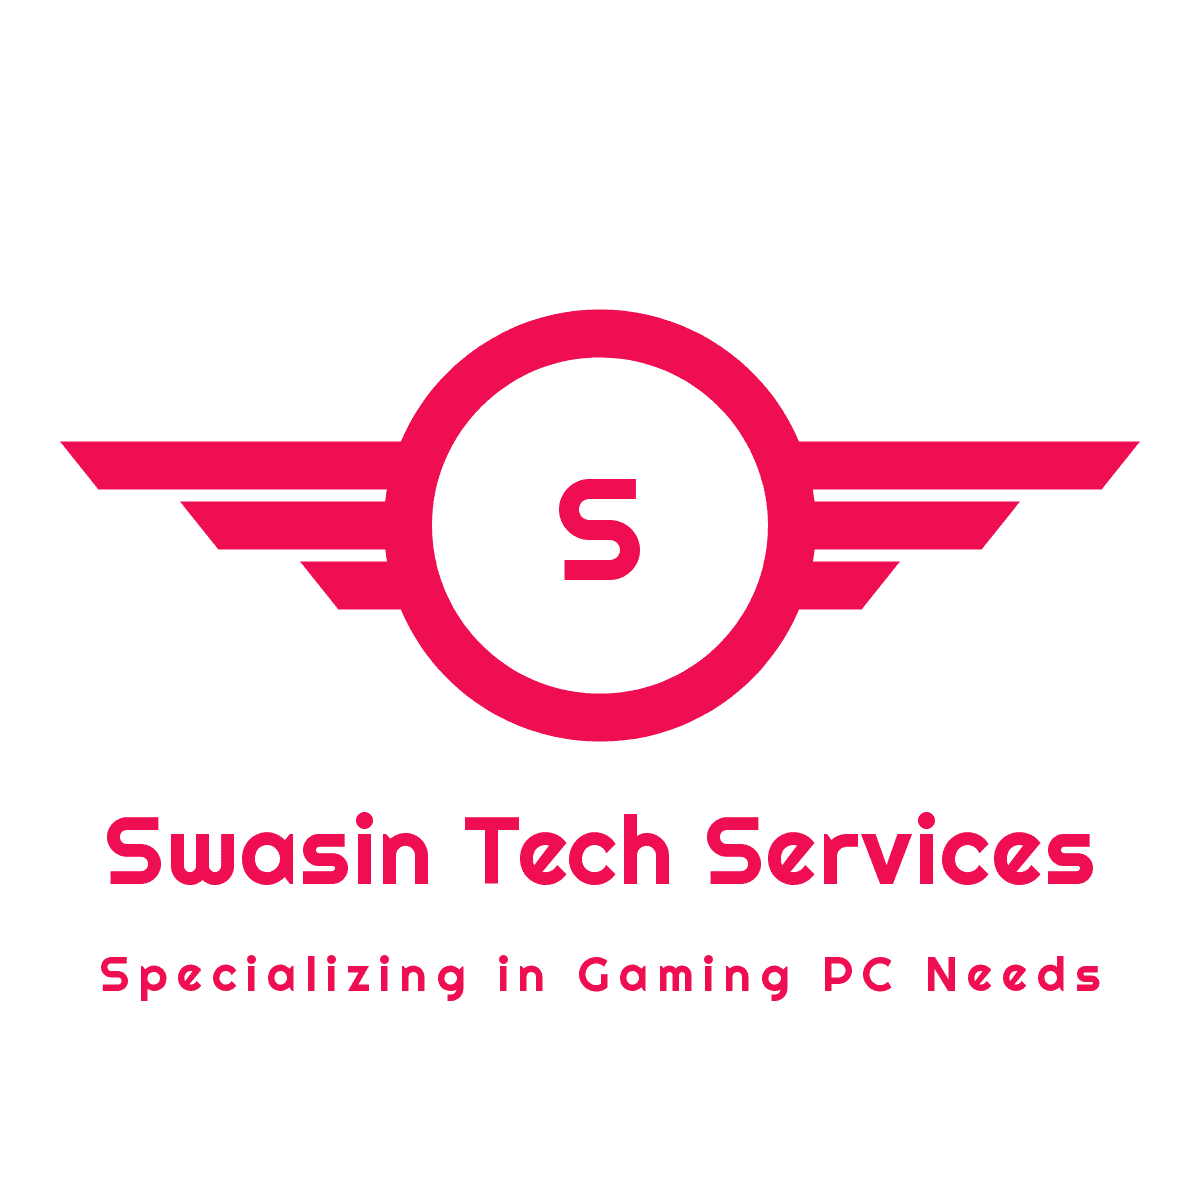 Swasin Tech Services